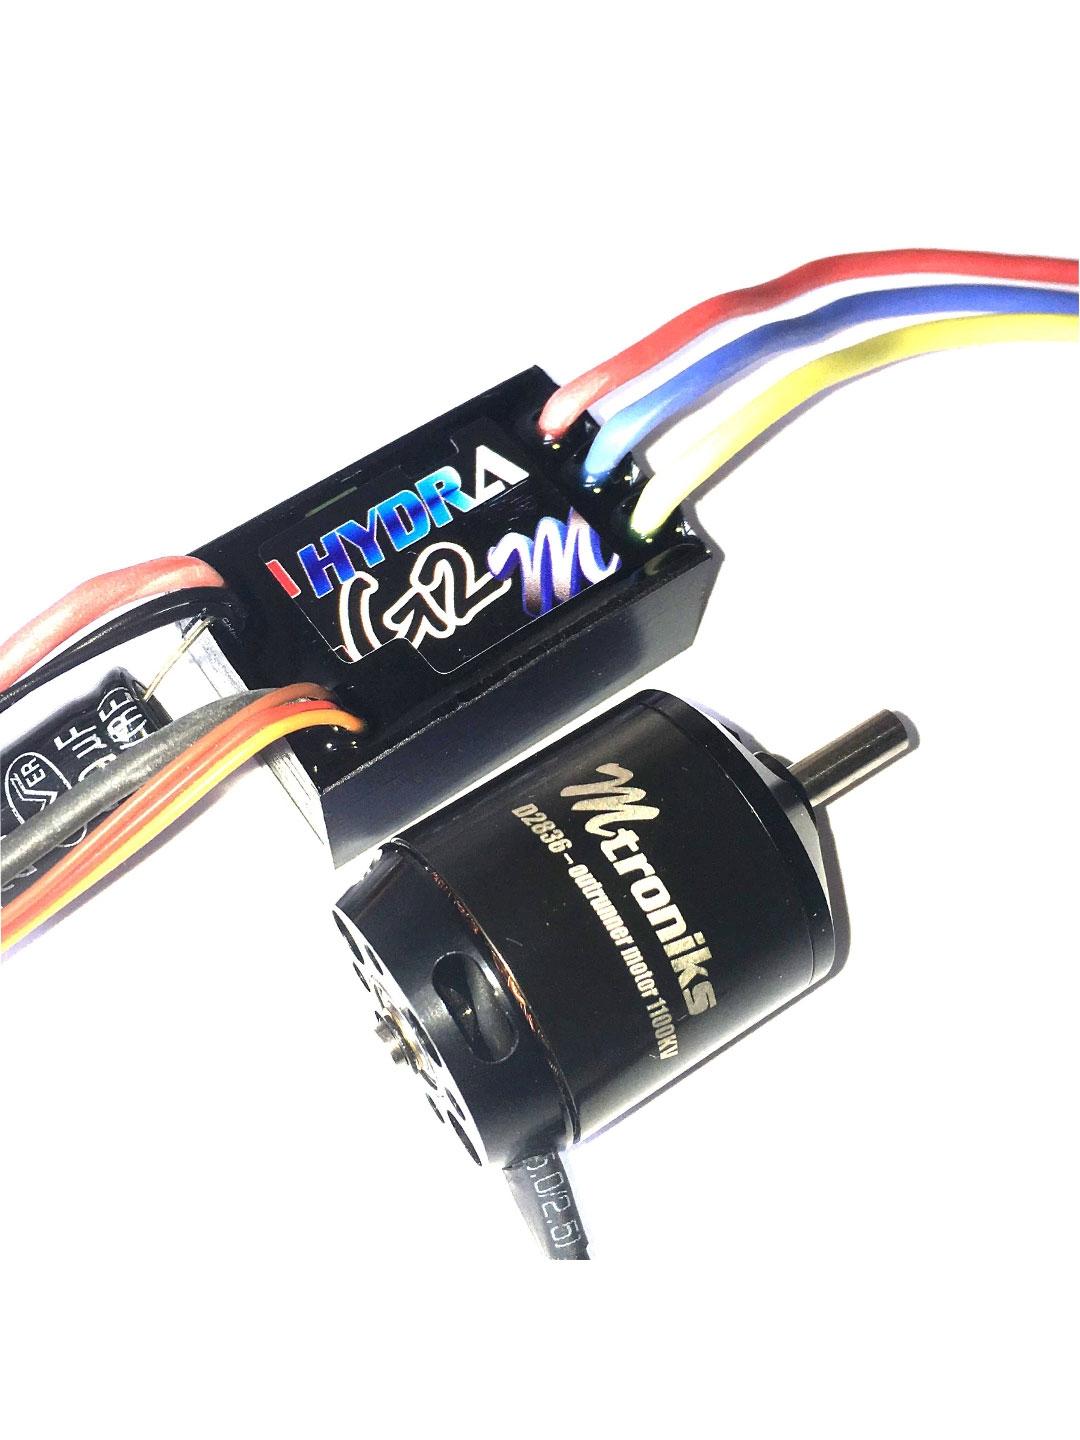 Rc Boat Speed Controller:  Features to Consider When Choosing an RC Boat Speed Controller 